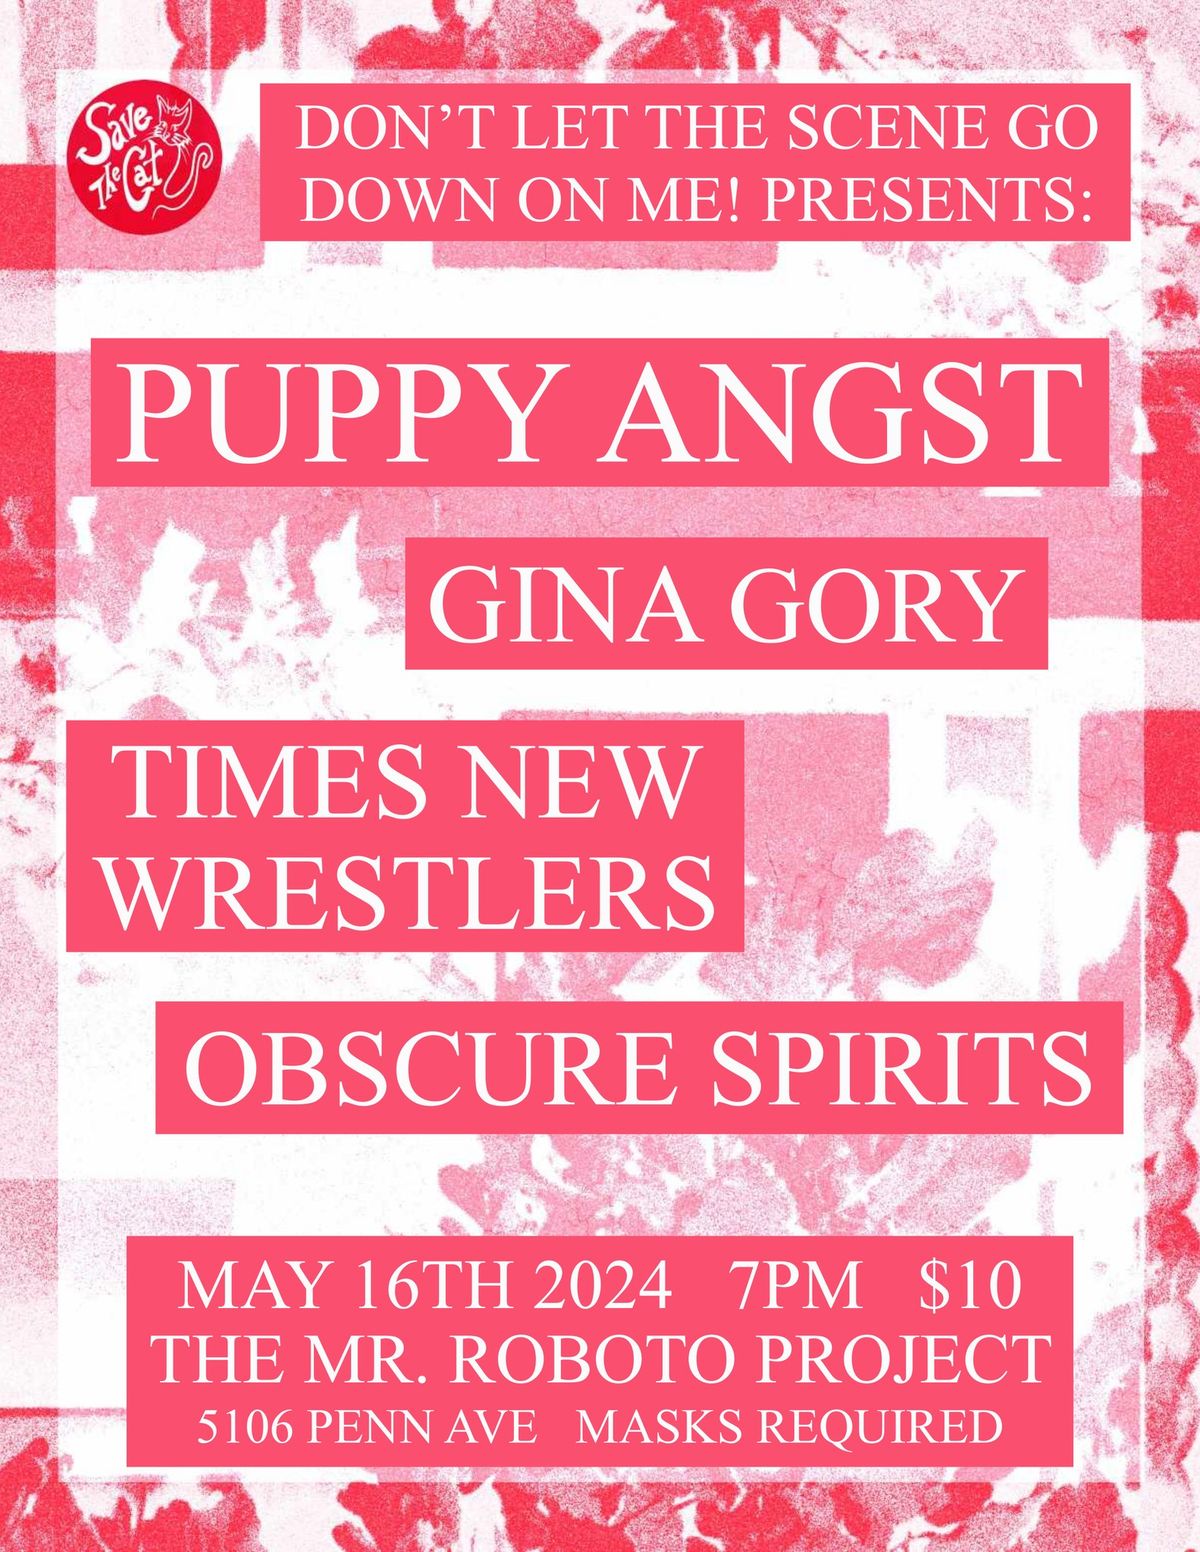 Puppy Angst w\/ Gina Gory + Times New Wrestlers + Obscure Spirits at Roboto